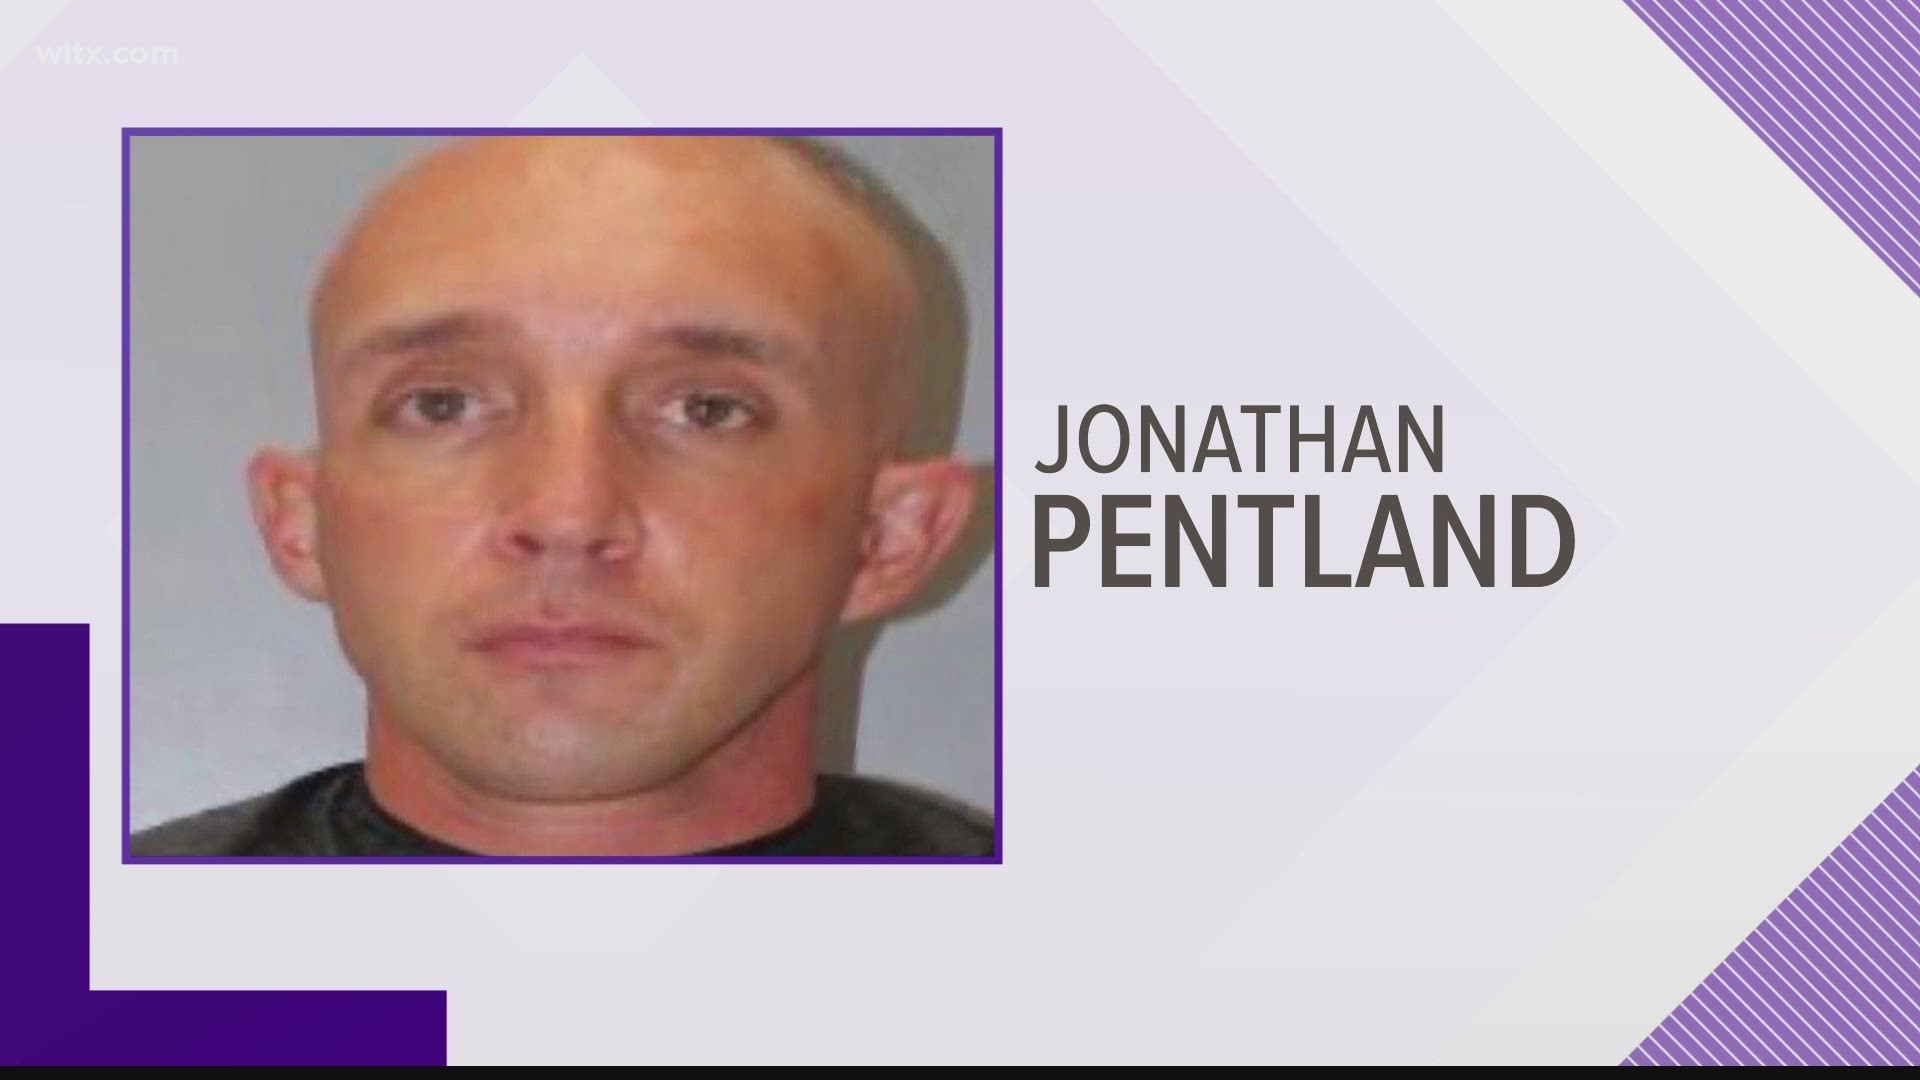 Law enforcement explains the charges against Sgt. First class Jonathan Pentland who was filmed harassing and shoving a young Black man walking in the neighborhood